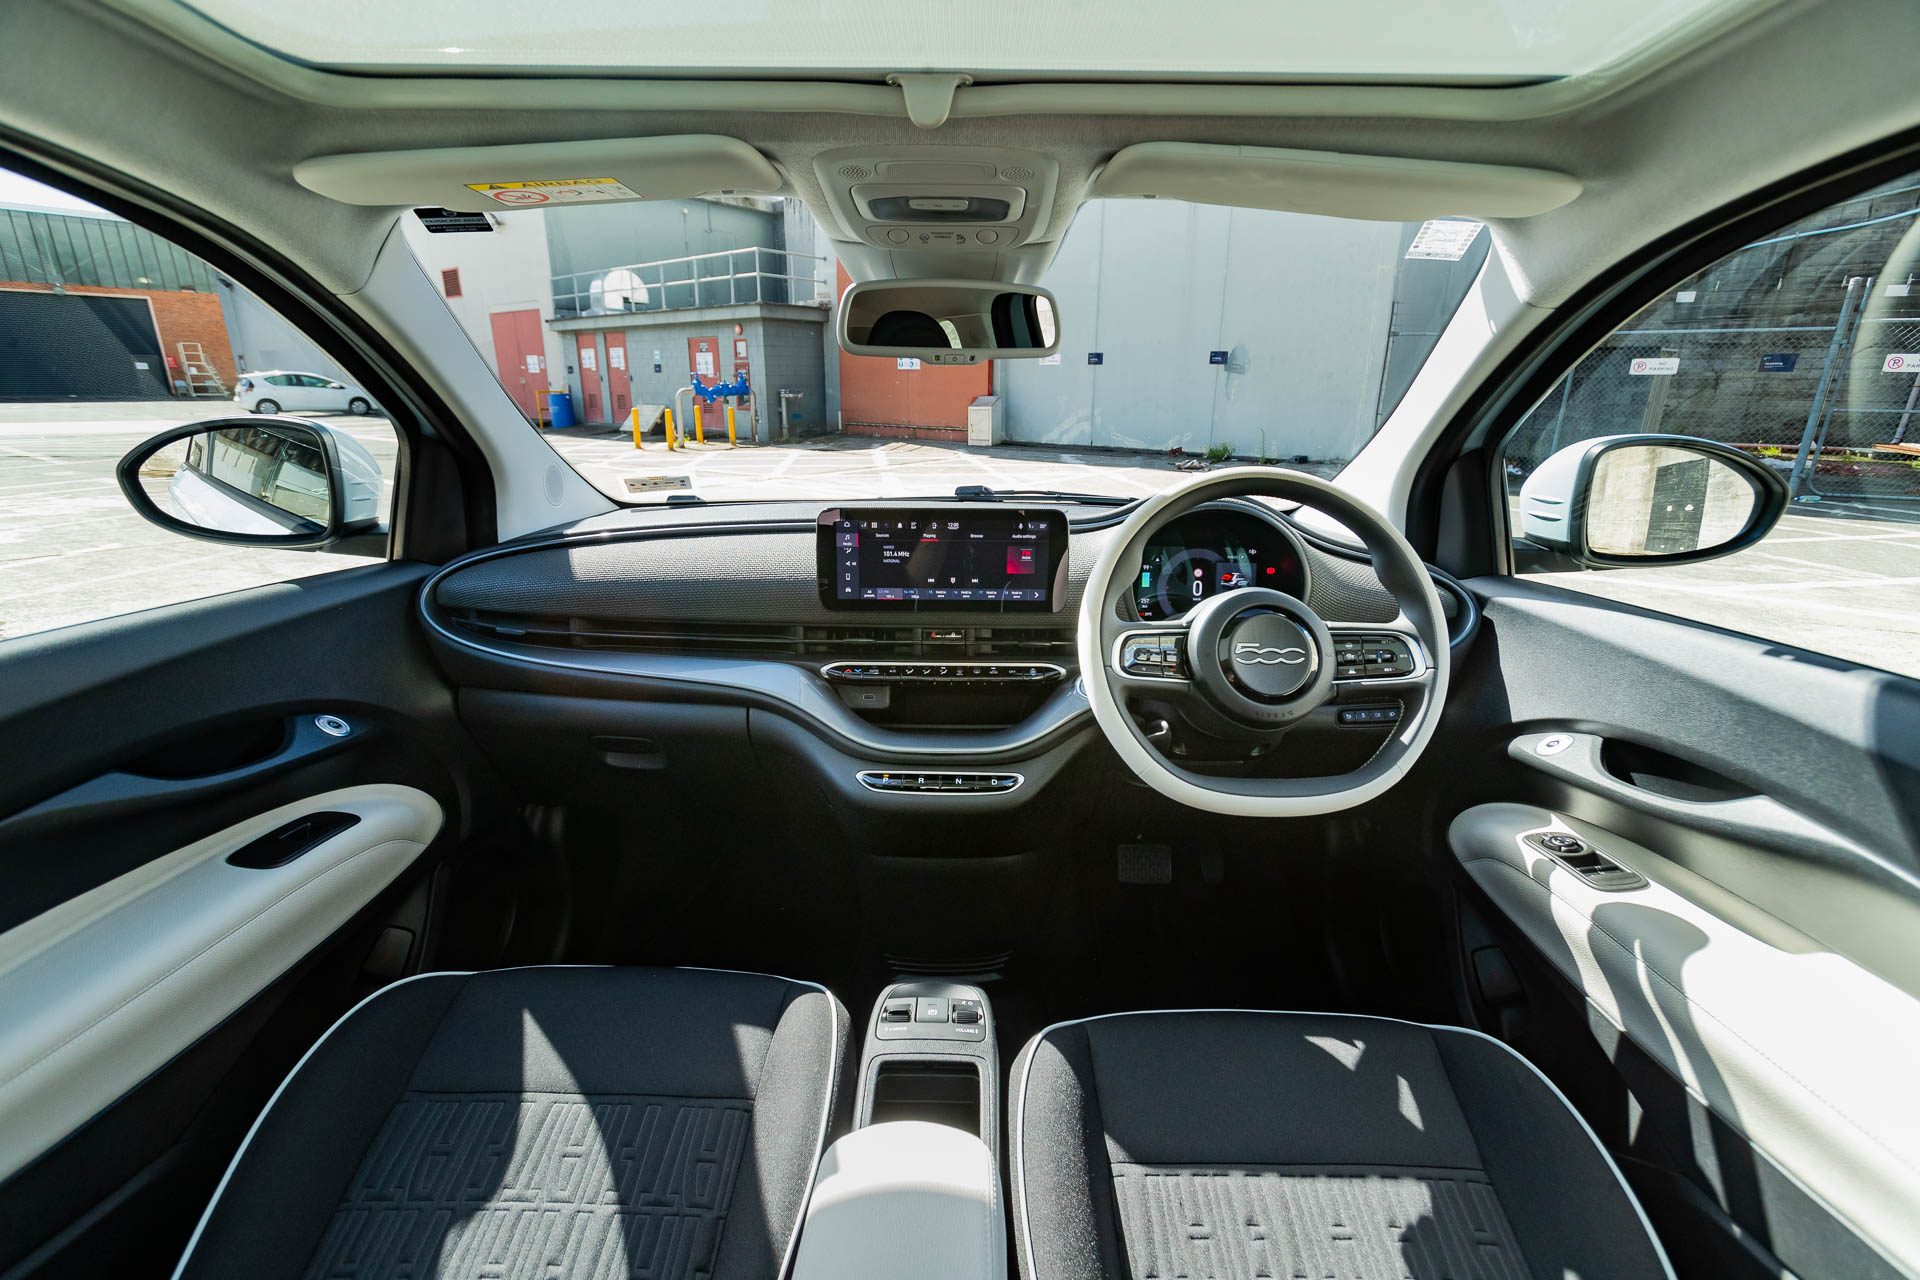 Fiat 500 hybrid interior will ape this one in the 500e.